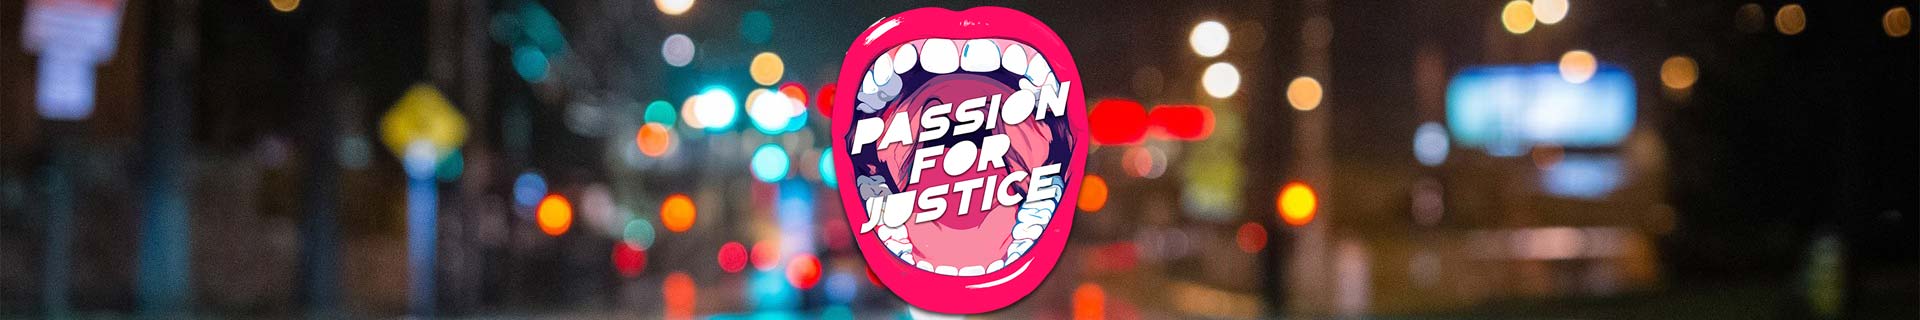 our voice passion for justice